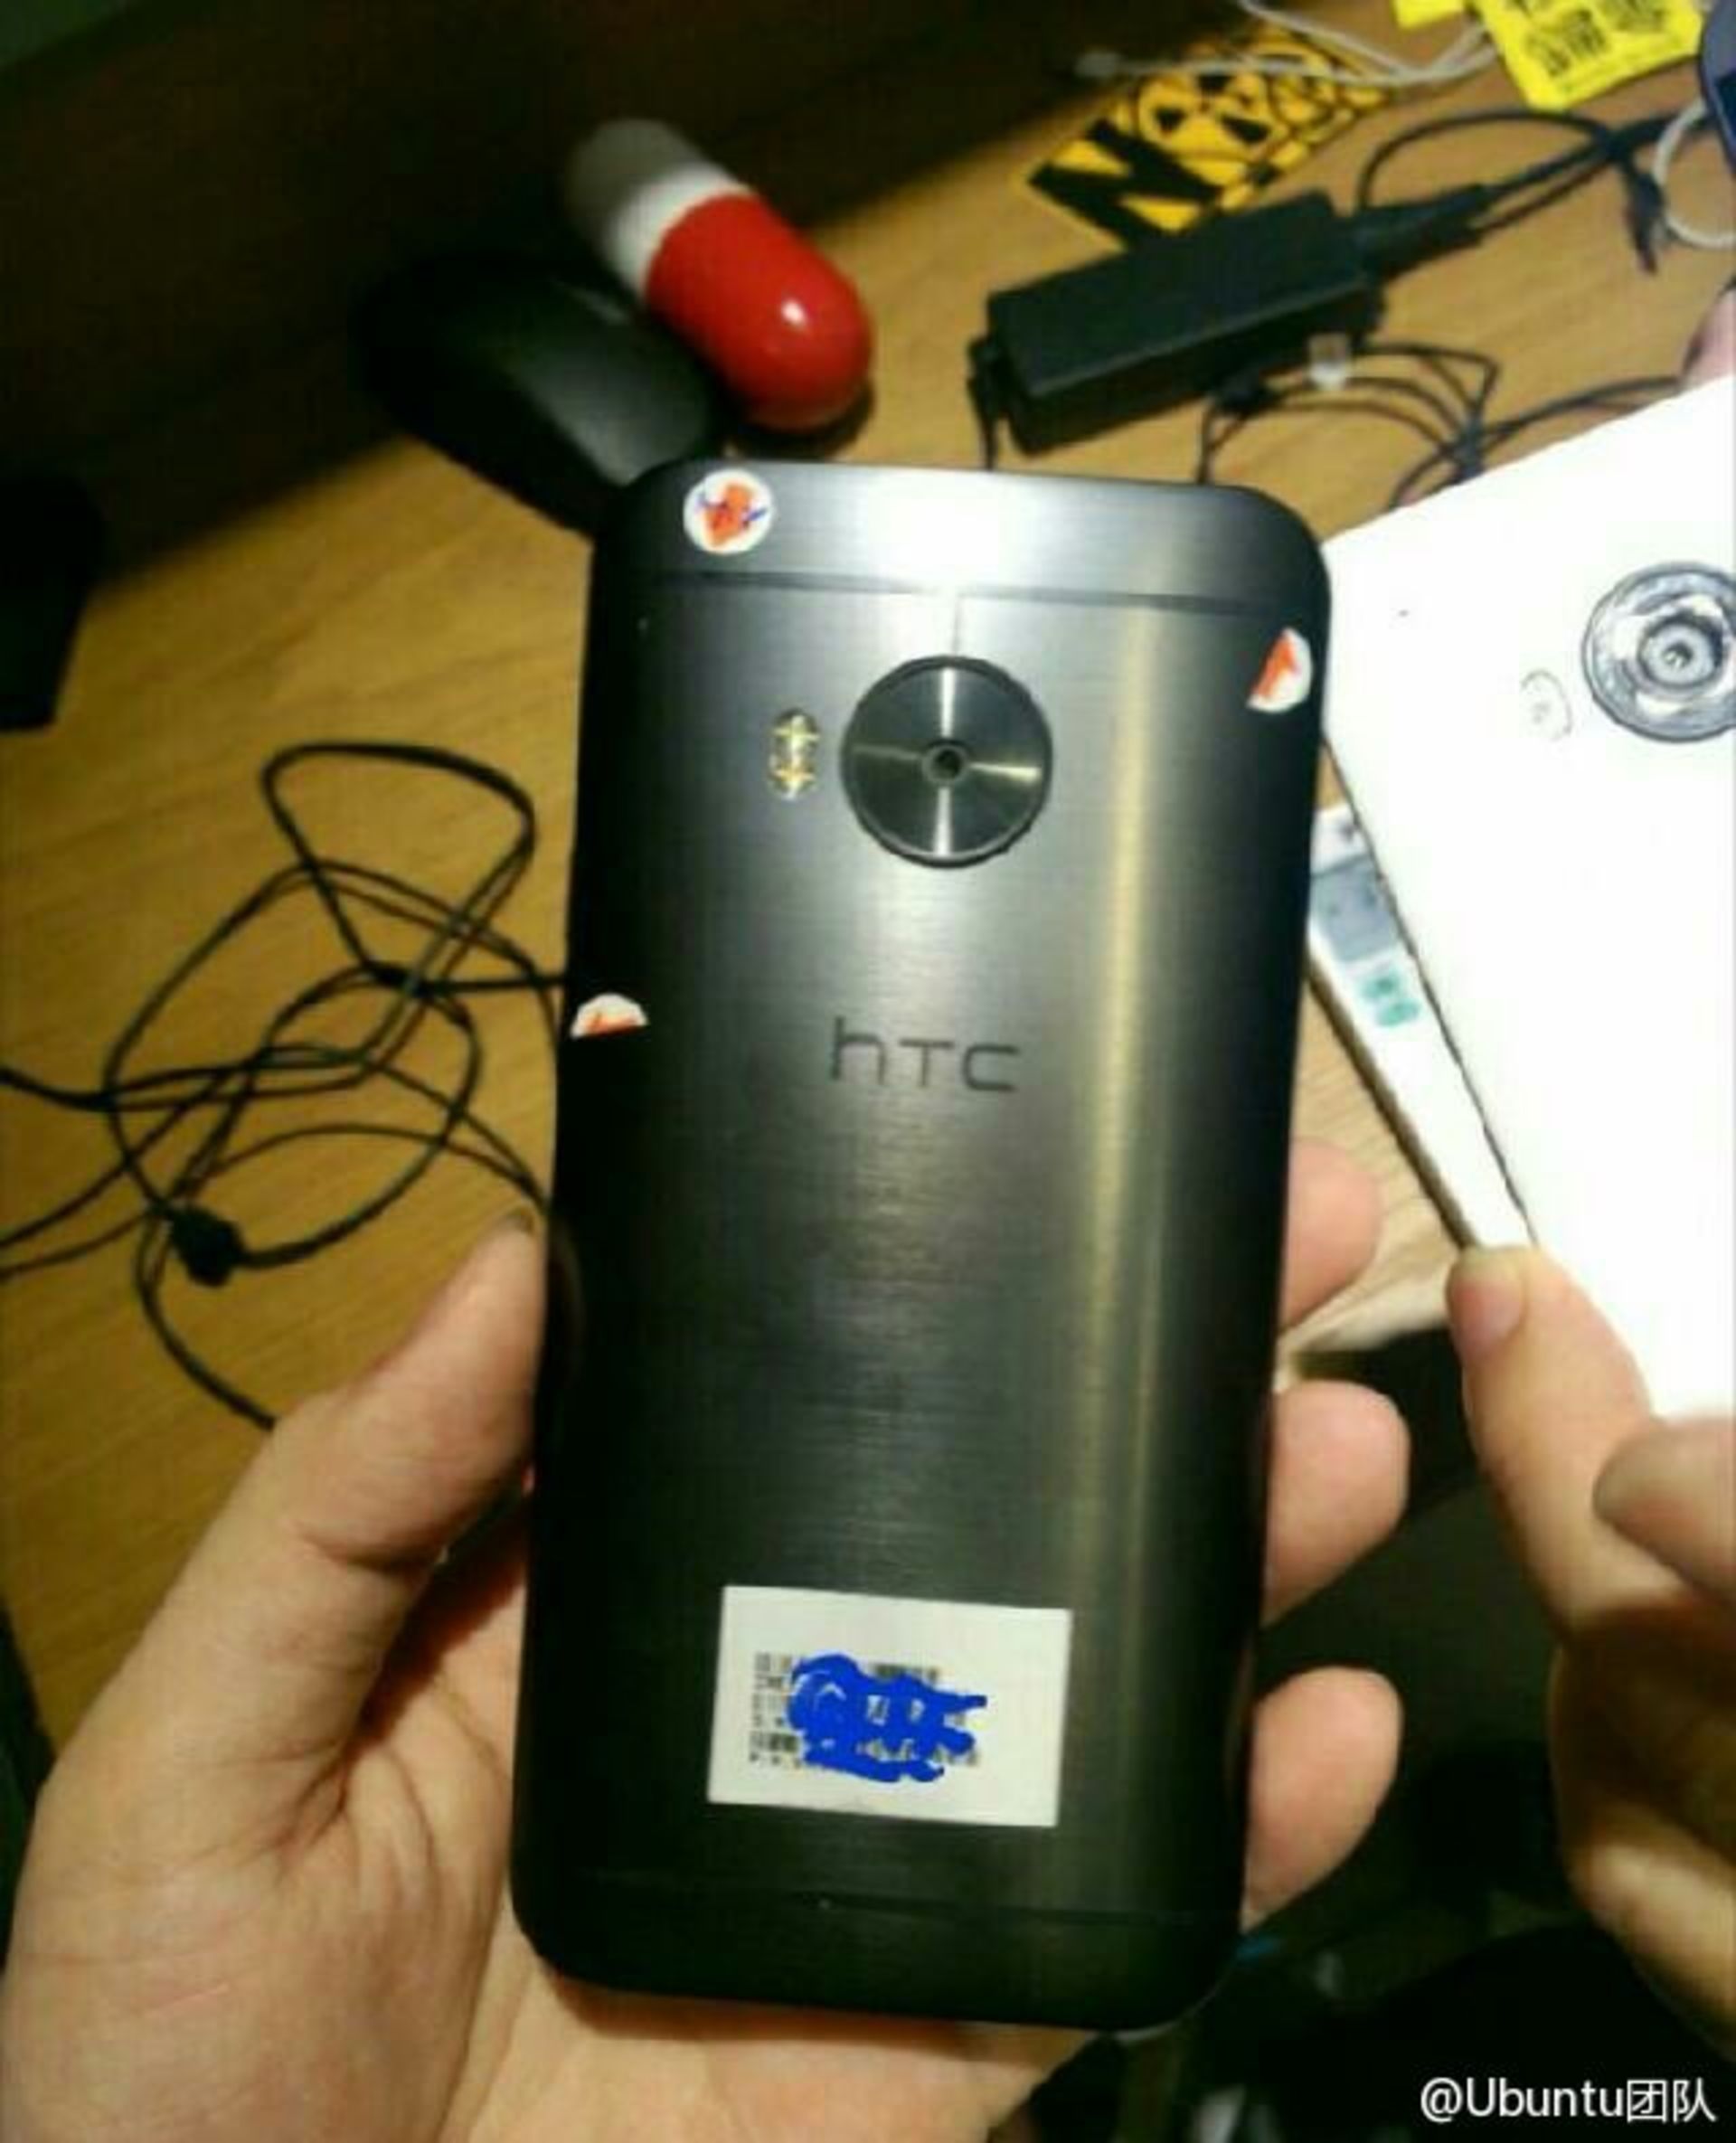 HTC-One-M9-Plus--HTC-Desire-A55-leaked-images 1